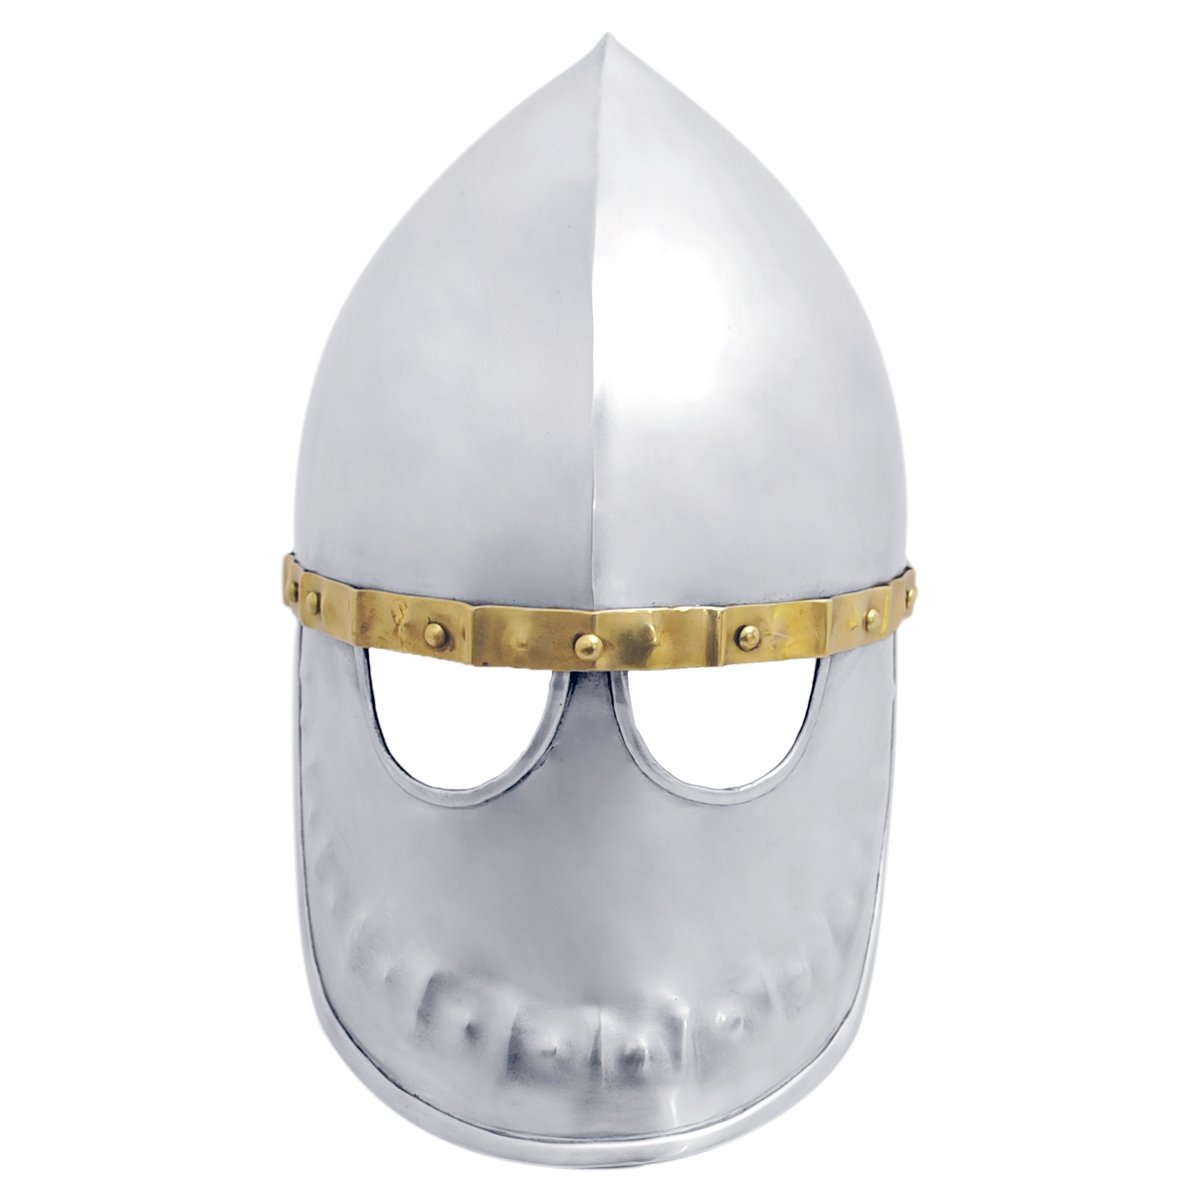 Italo Norman helmet with Face Plate C.1170, Size XL